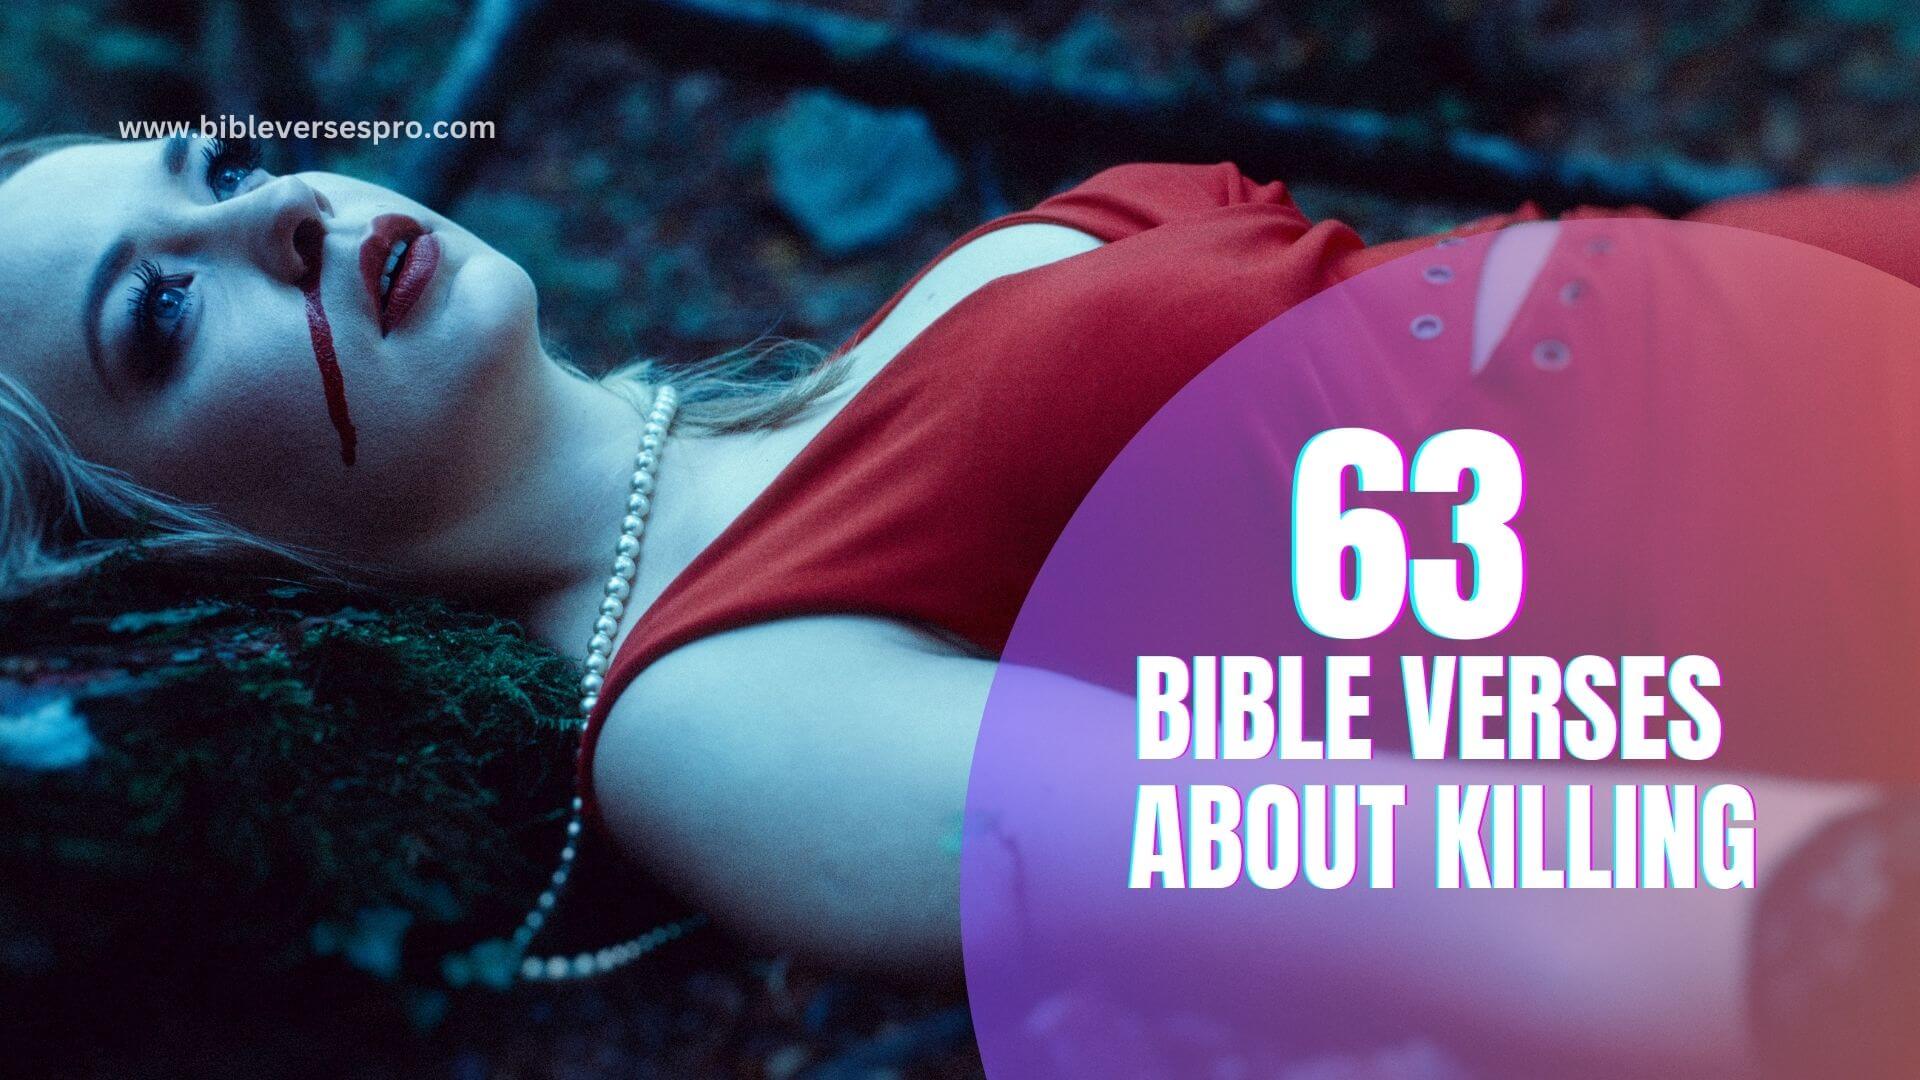 BIBLE VERSES ABOUT KILLING (1)